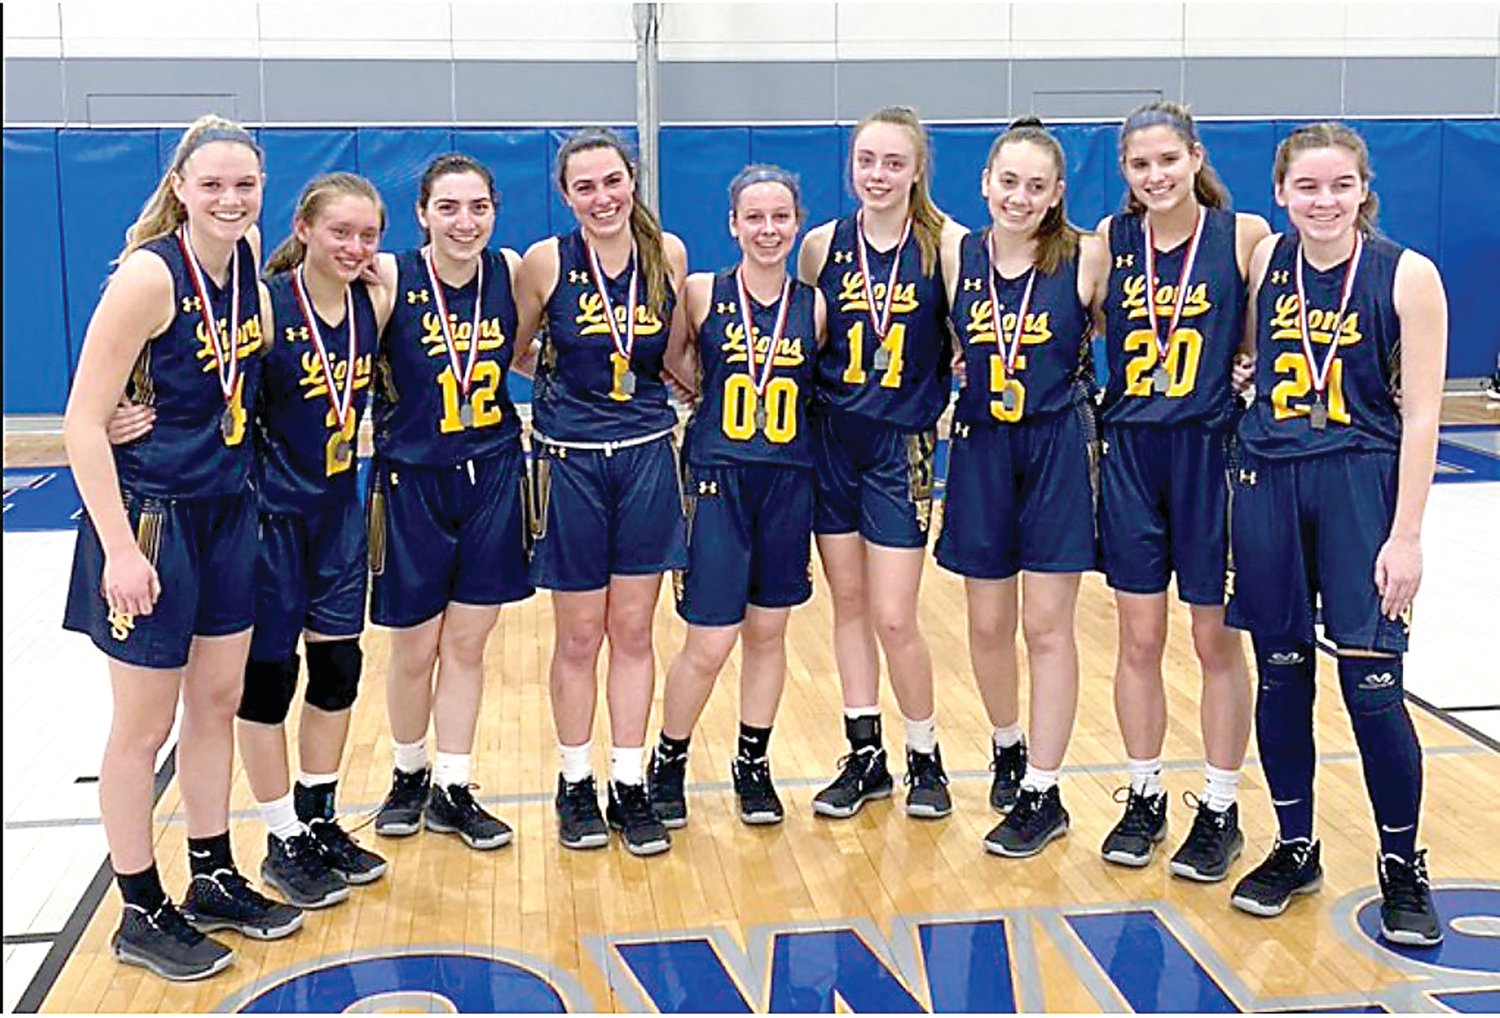 The New Hope-Solebury girls basketball team finished second in the District One Class 3A tournament.